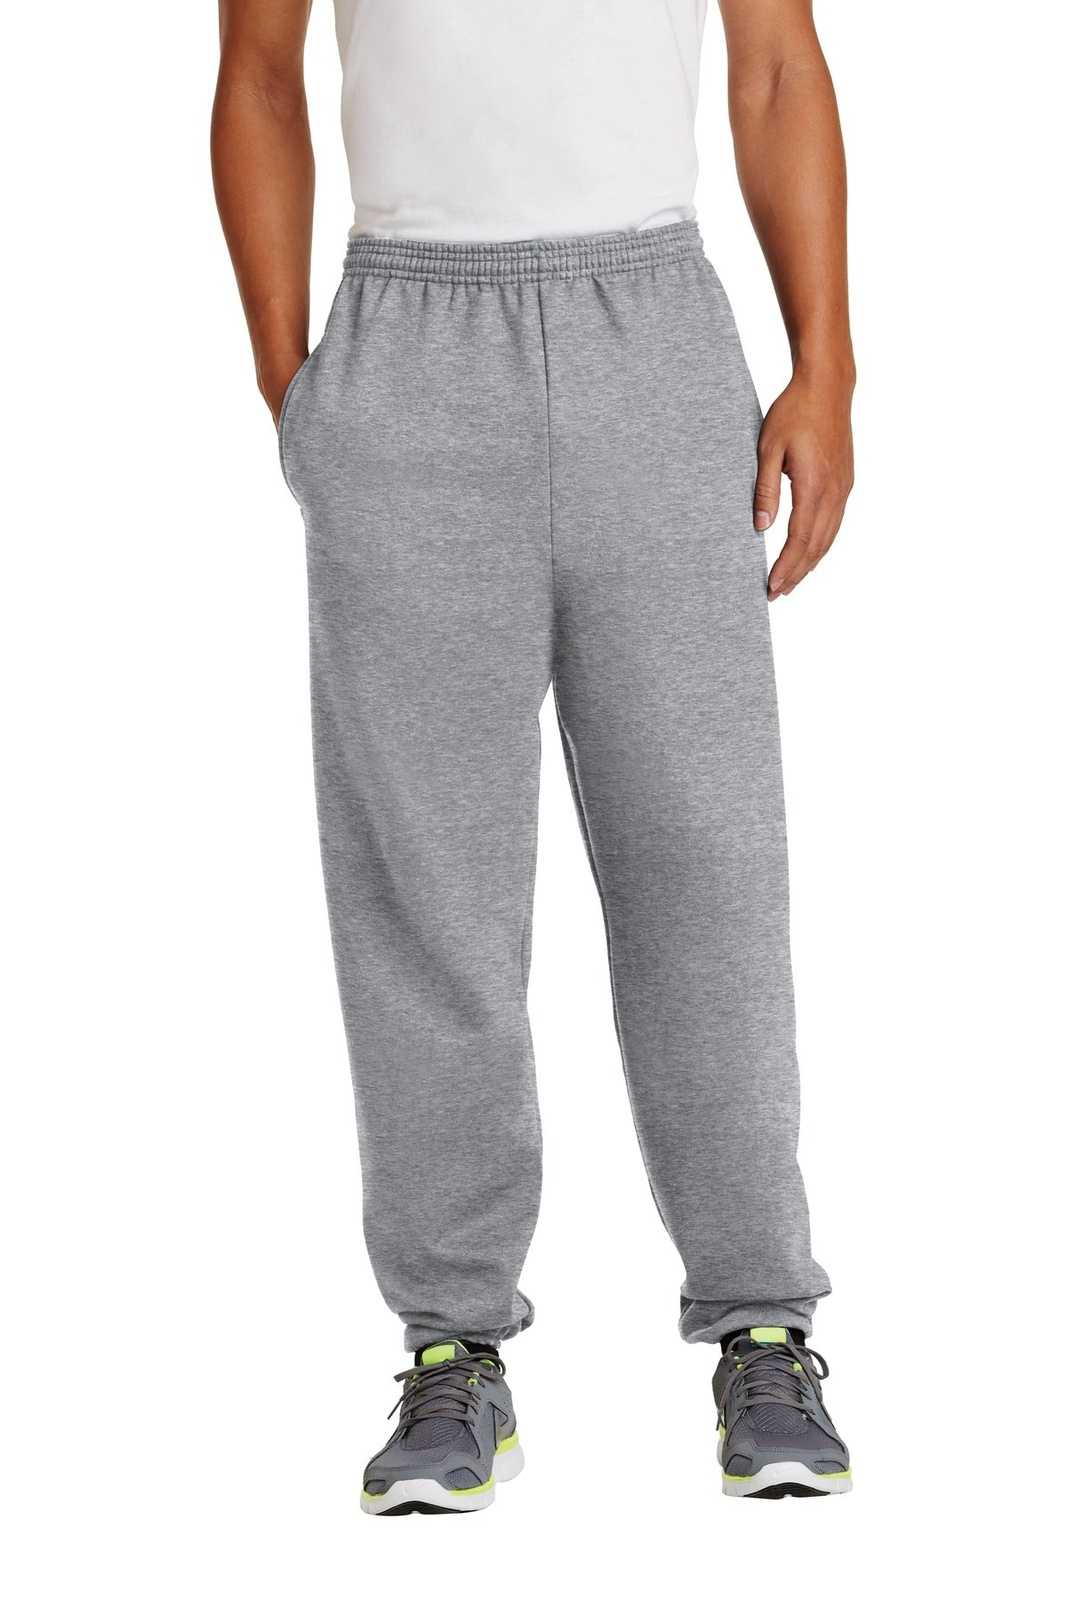 Port & Company PC90P Essential Fleece Sweatpant with Pockets - Athletic Heather - HIT a Double - 1